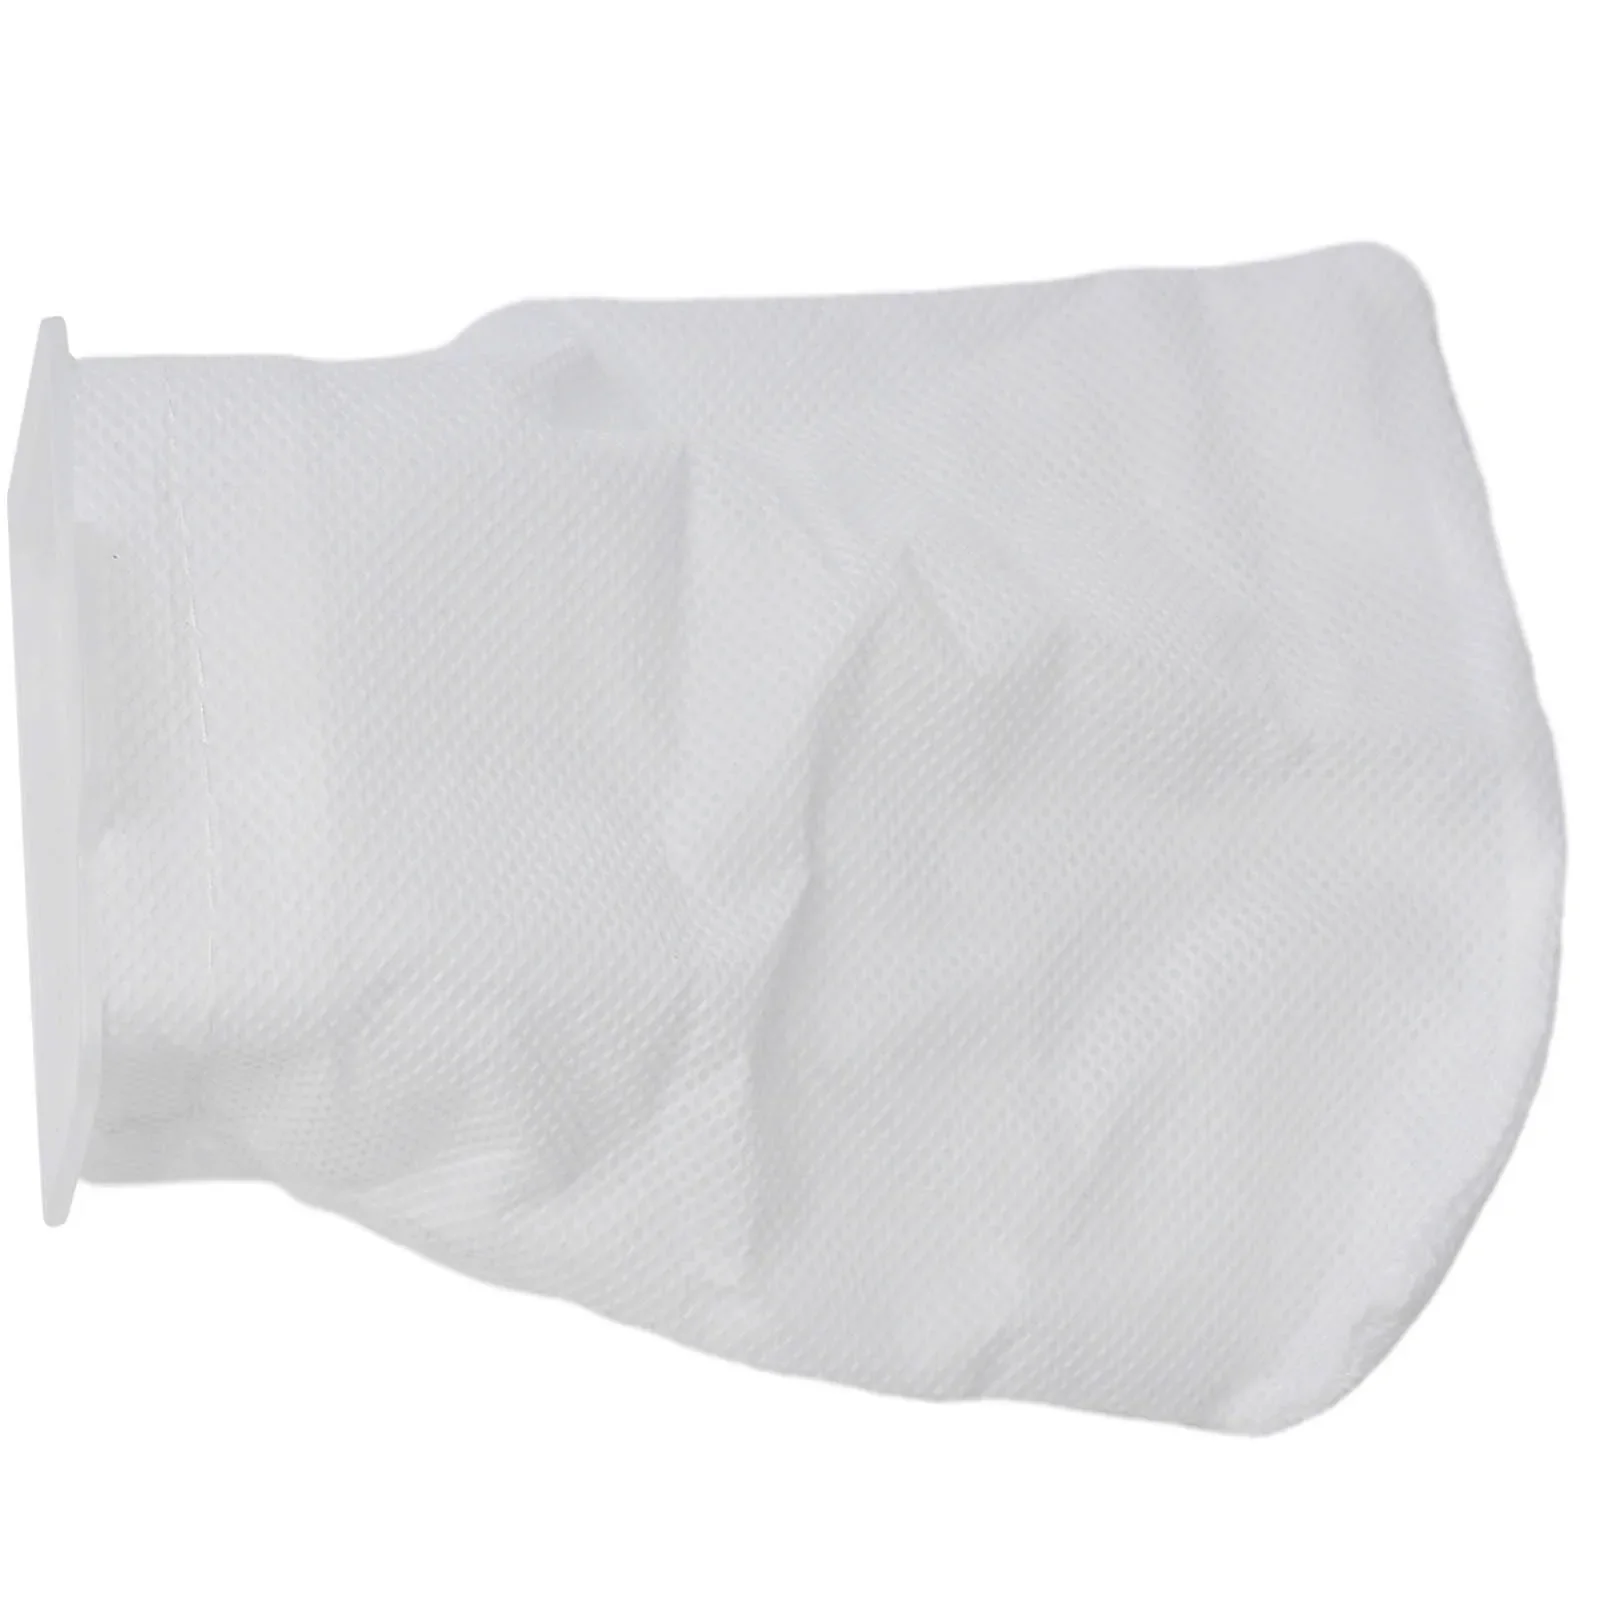 

More Durable Practical Washable High Quality Washable Dust Bag Dust Bags 166084-9 For Makita CL100/106/180 DCL180